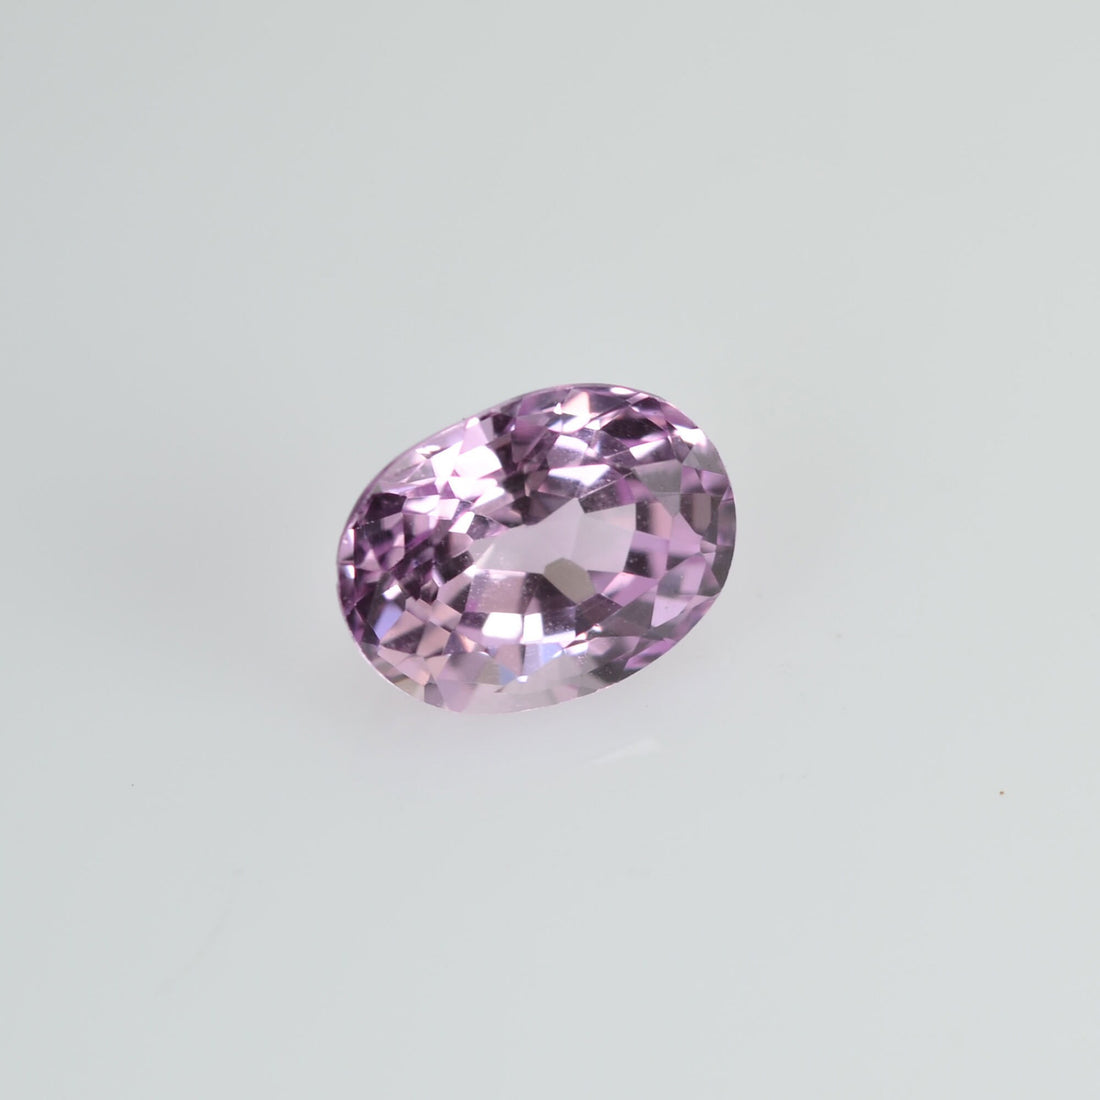 0.47 cts Natural Pink Sapphire Loose Gemstone oval Cut